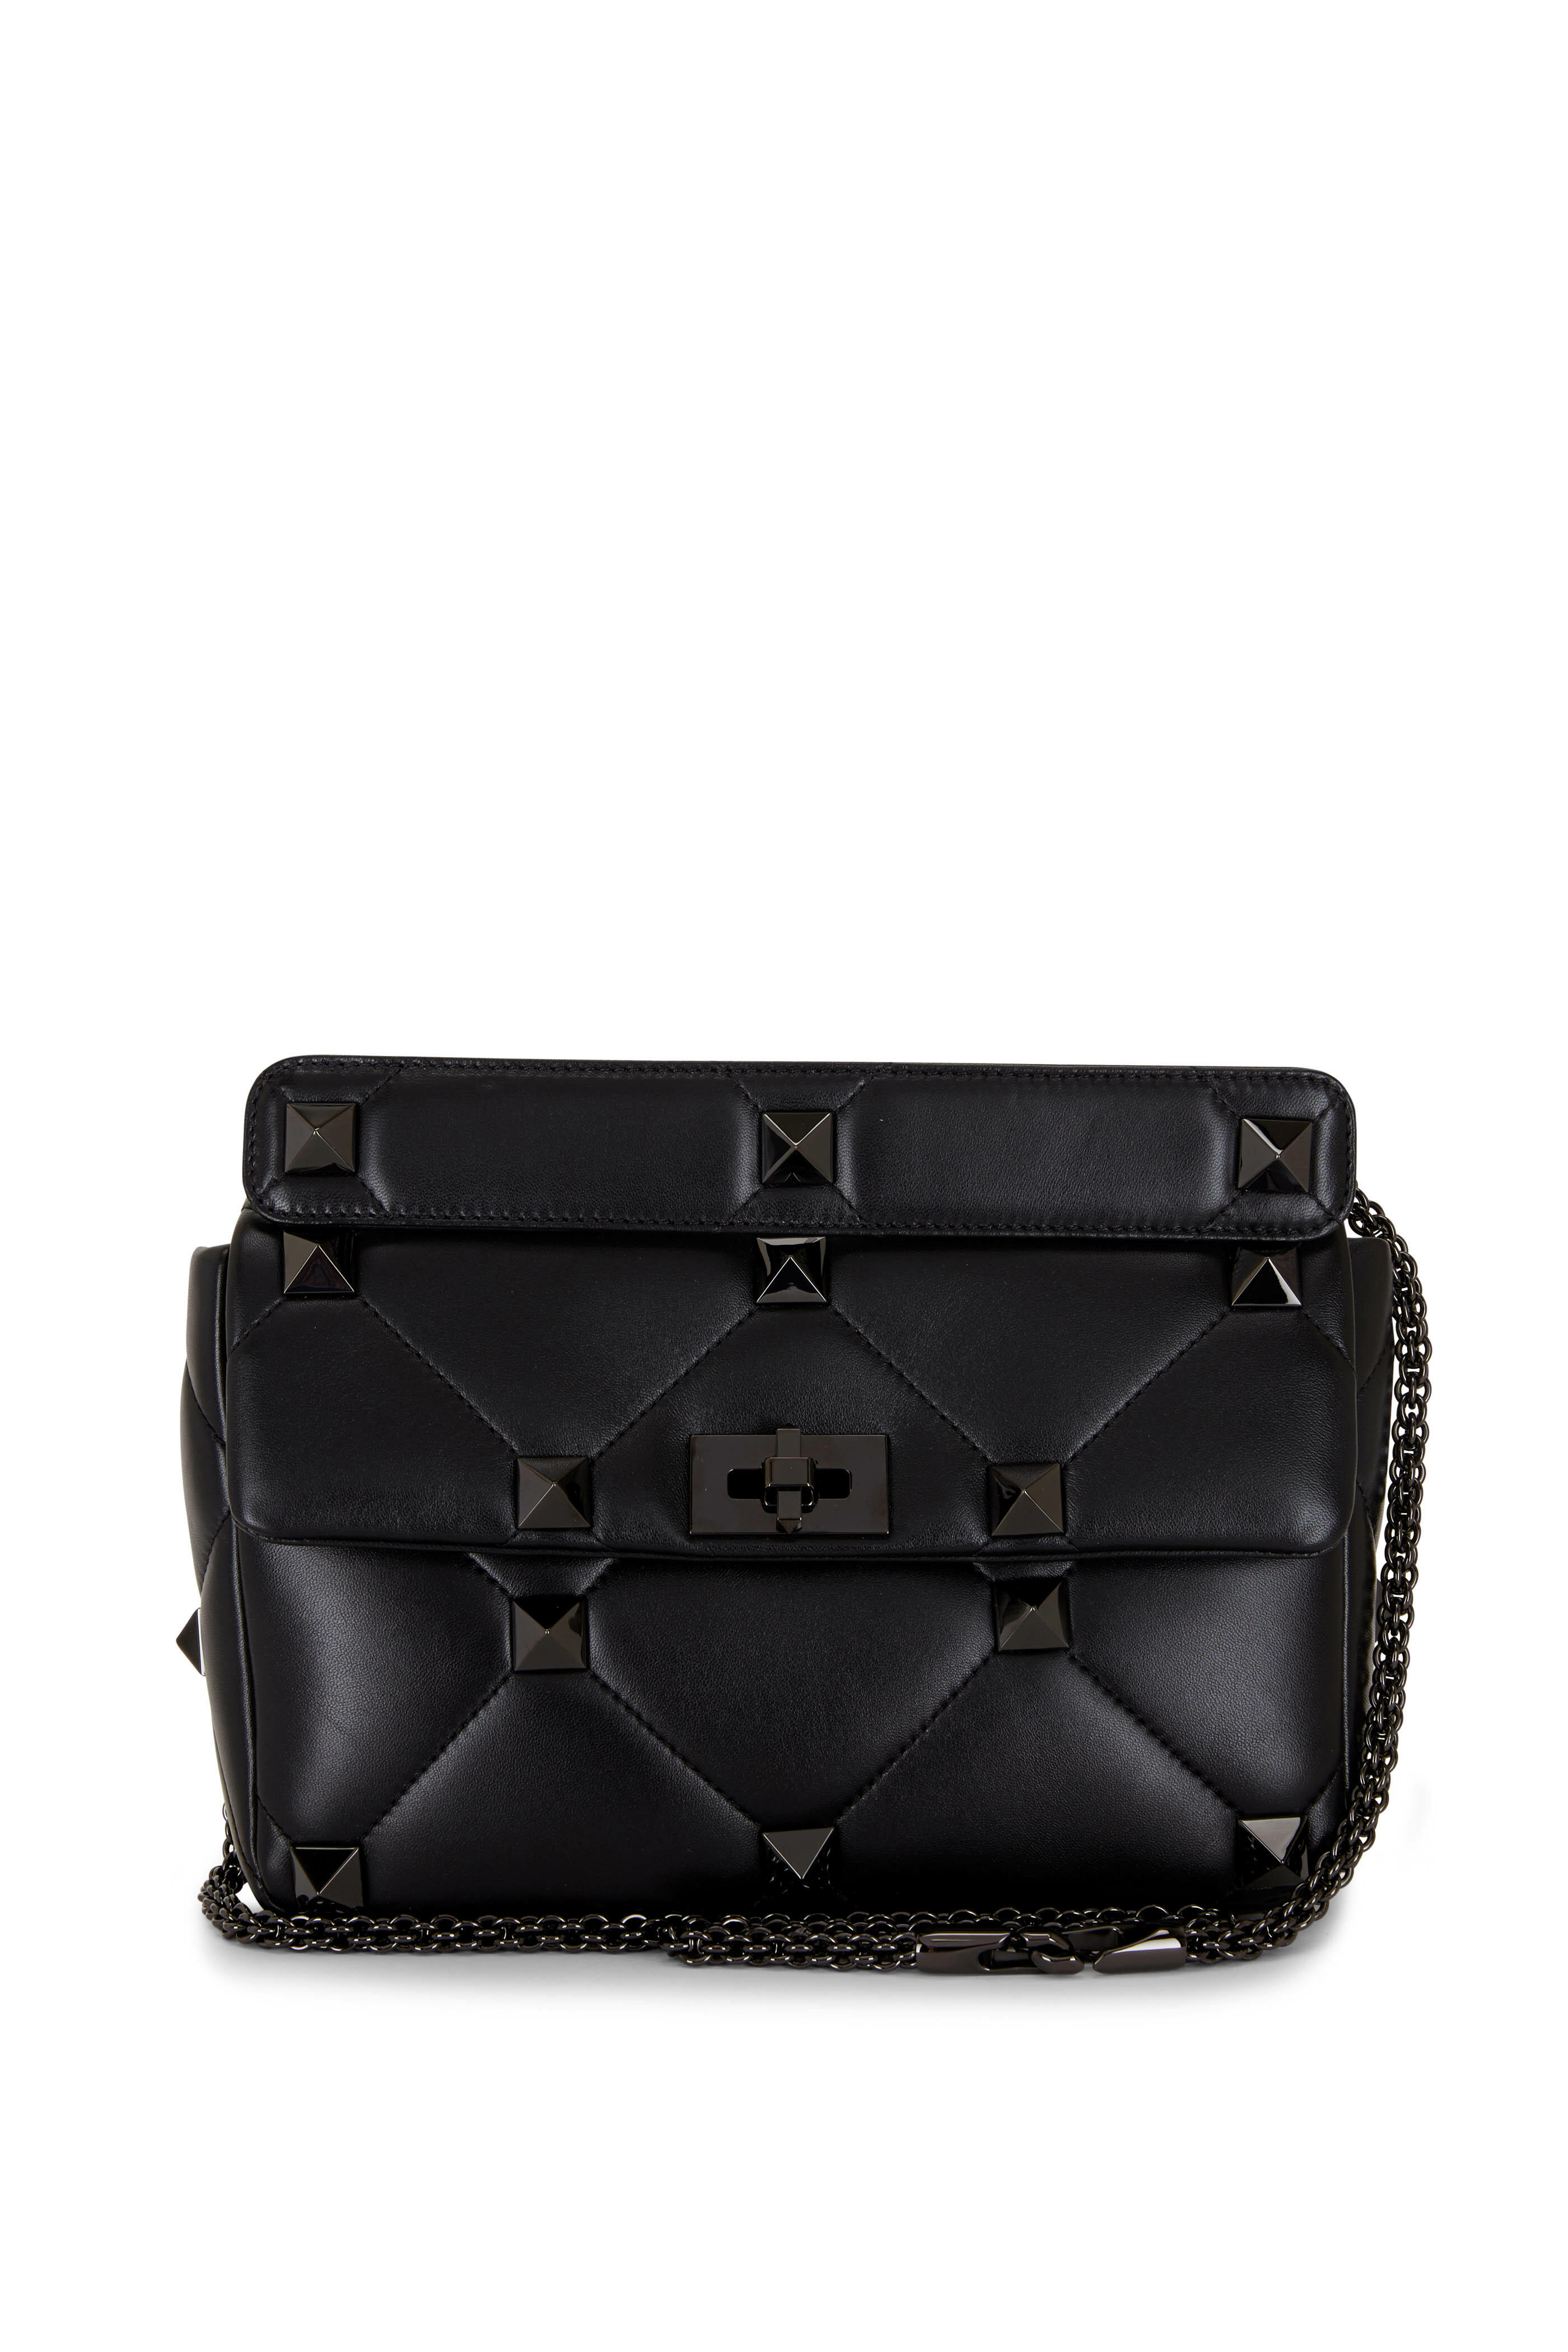 Valentino Metallic Silver Quilted Leather Mini Candystud Top Handle Bag  Valentino